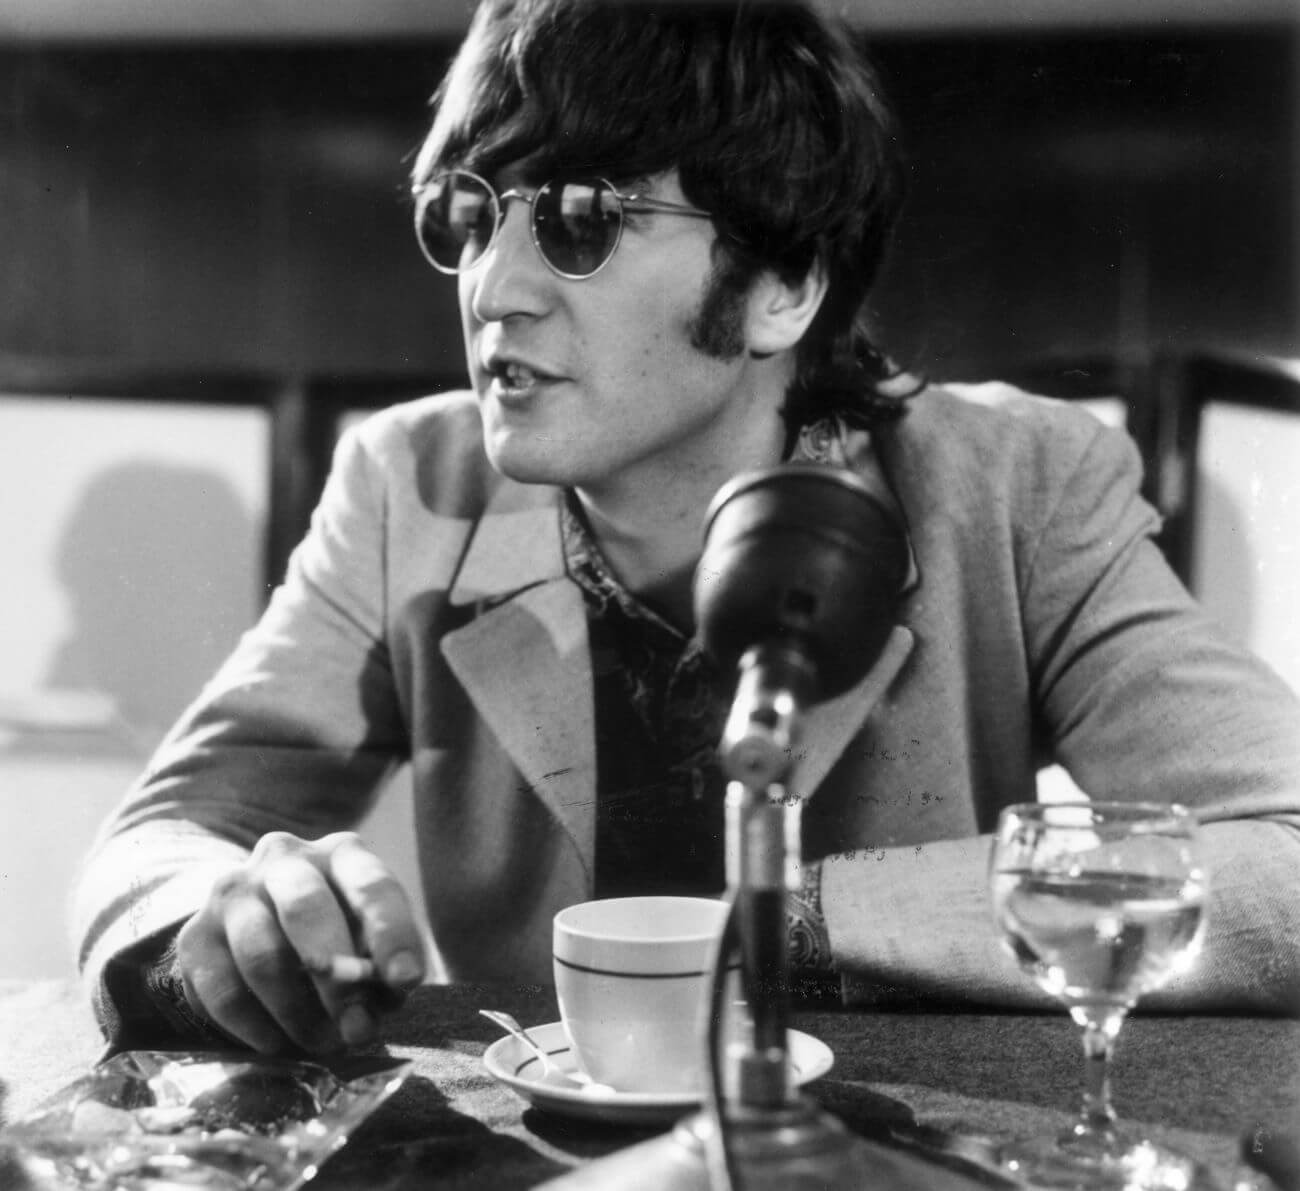 A black and white picture of John Lennon wearing sunglasses and sitting at a table in front of a microphone.